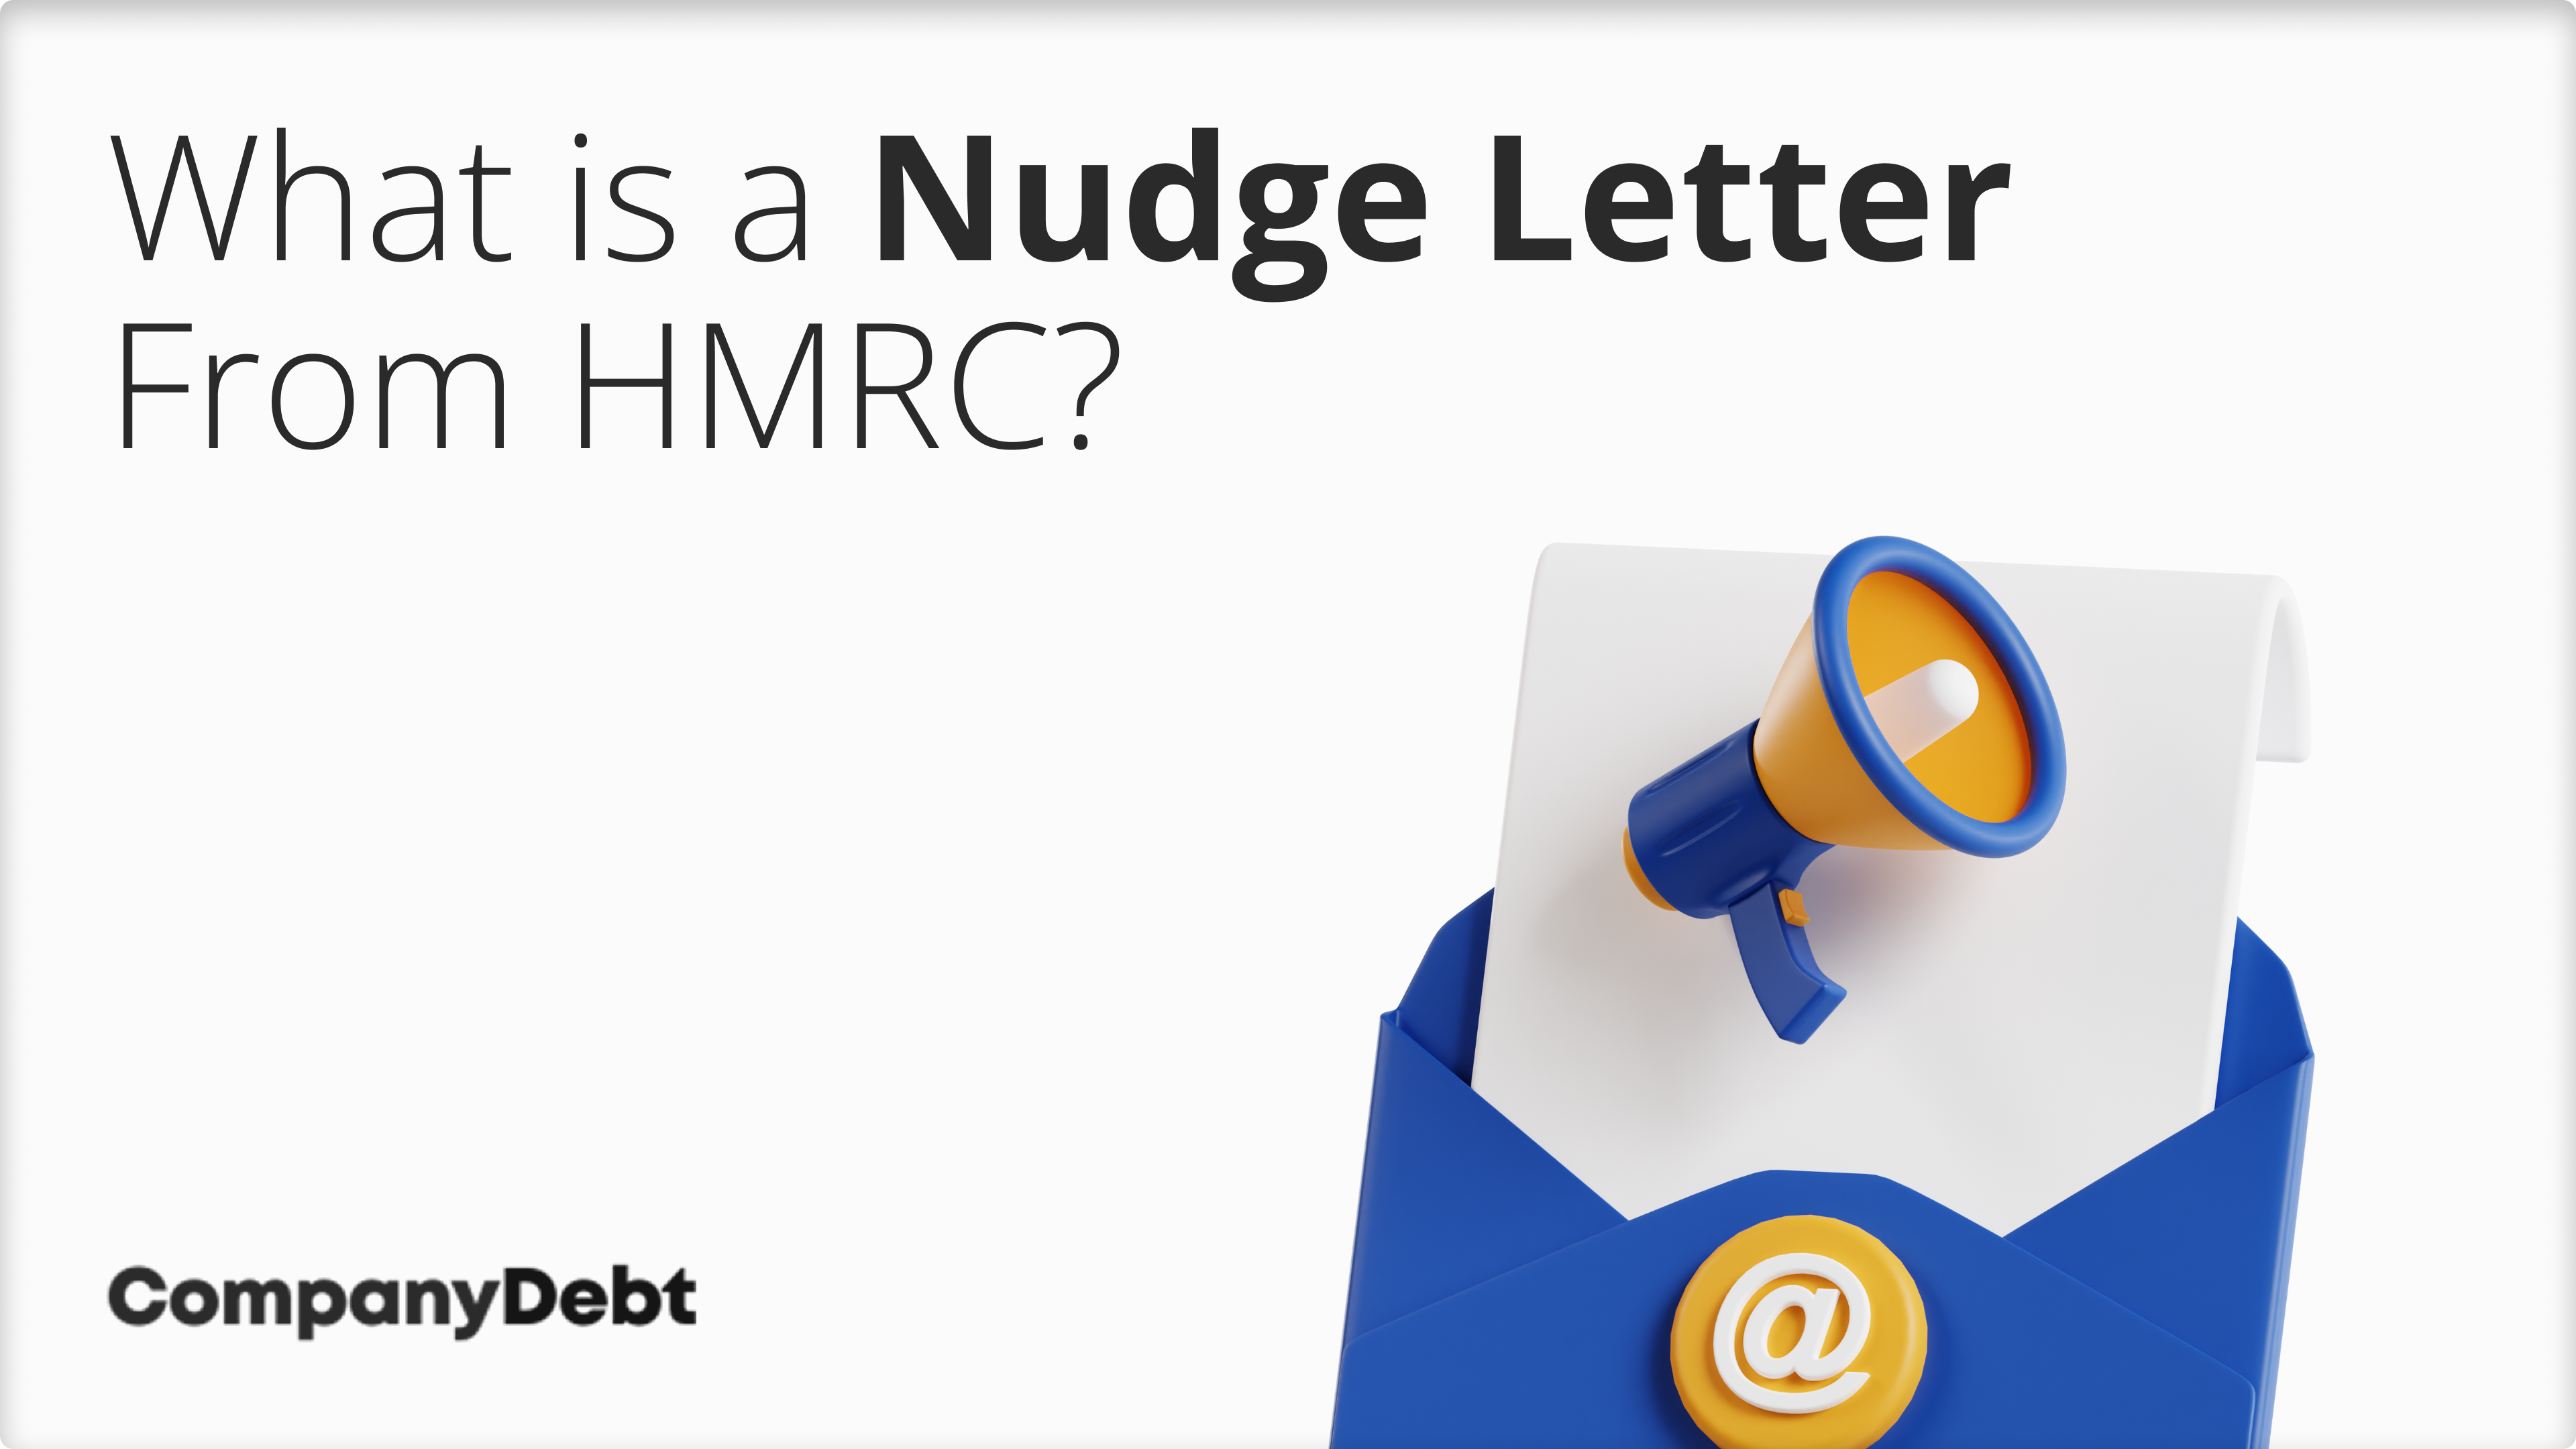 What is a Nudge Letter From HMRC?